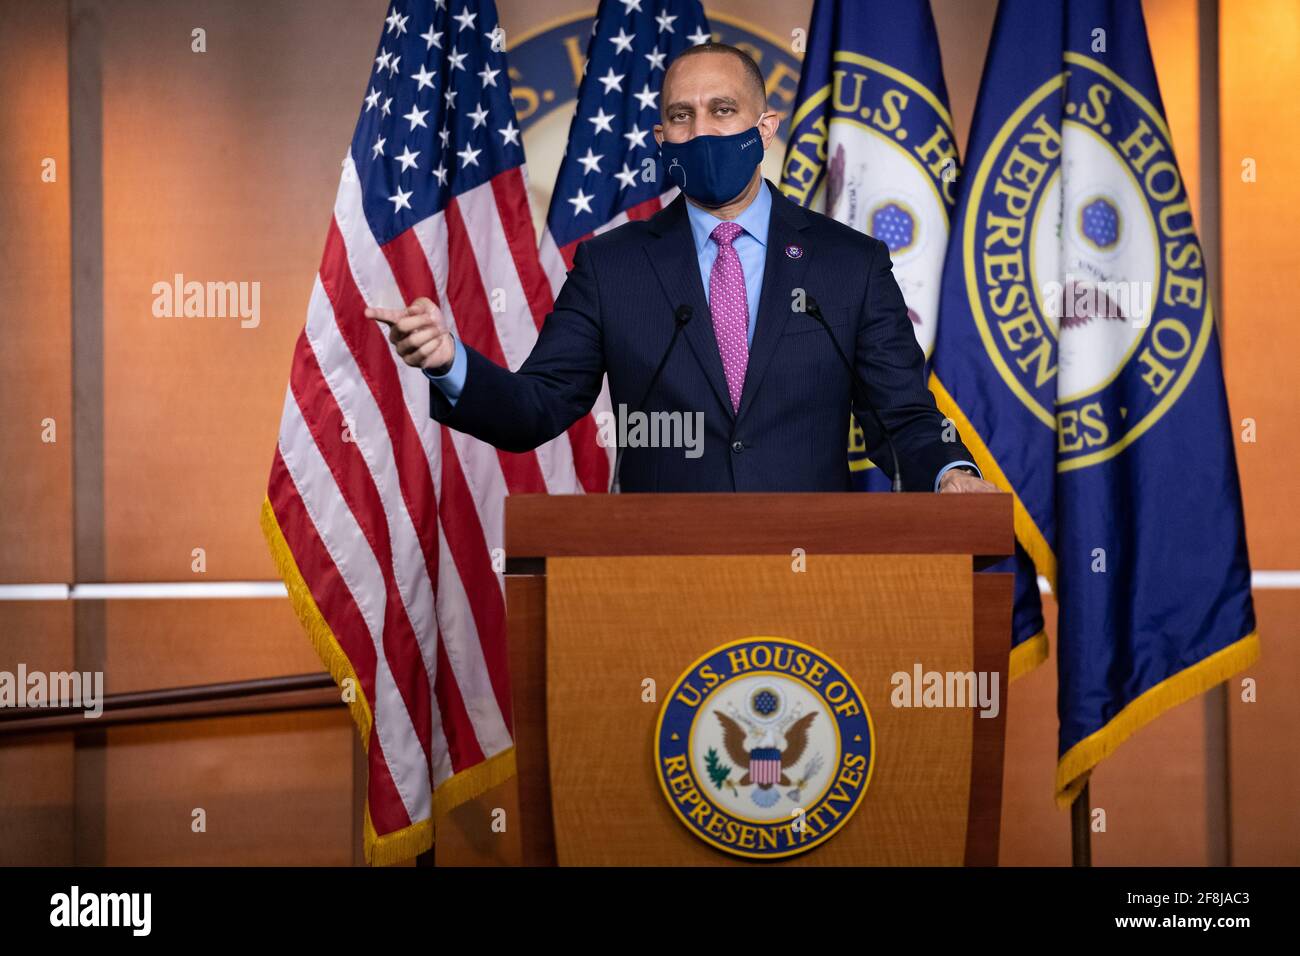 Washington, USA. 14th Apr, 2021. Representative Hakeem Jeffries (D-NY) during a House Democrat Conference press conference, at the U.S. Capitol in Washington, DC, on Wednesday, April 14, 2021. Congressional pressure is mounting in Congress on President Biden Administration's immigration policies as negotiations continue over additional economic relief measures. (Graeme Sloan/Sipa USA) Credit: Sipa USA/Alamy Live News Stock Photo